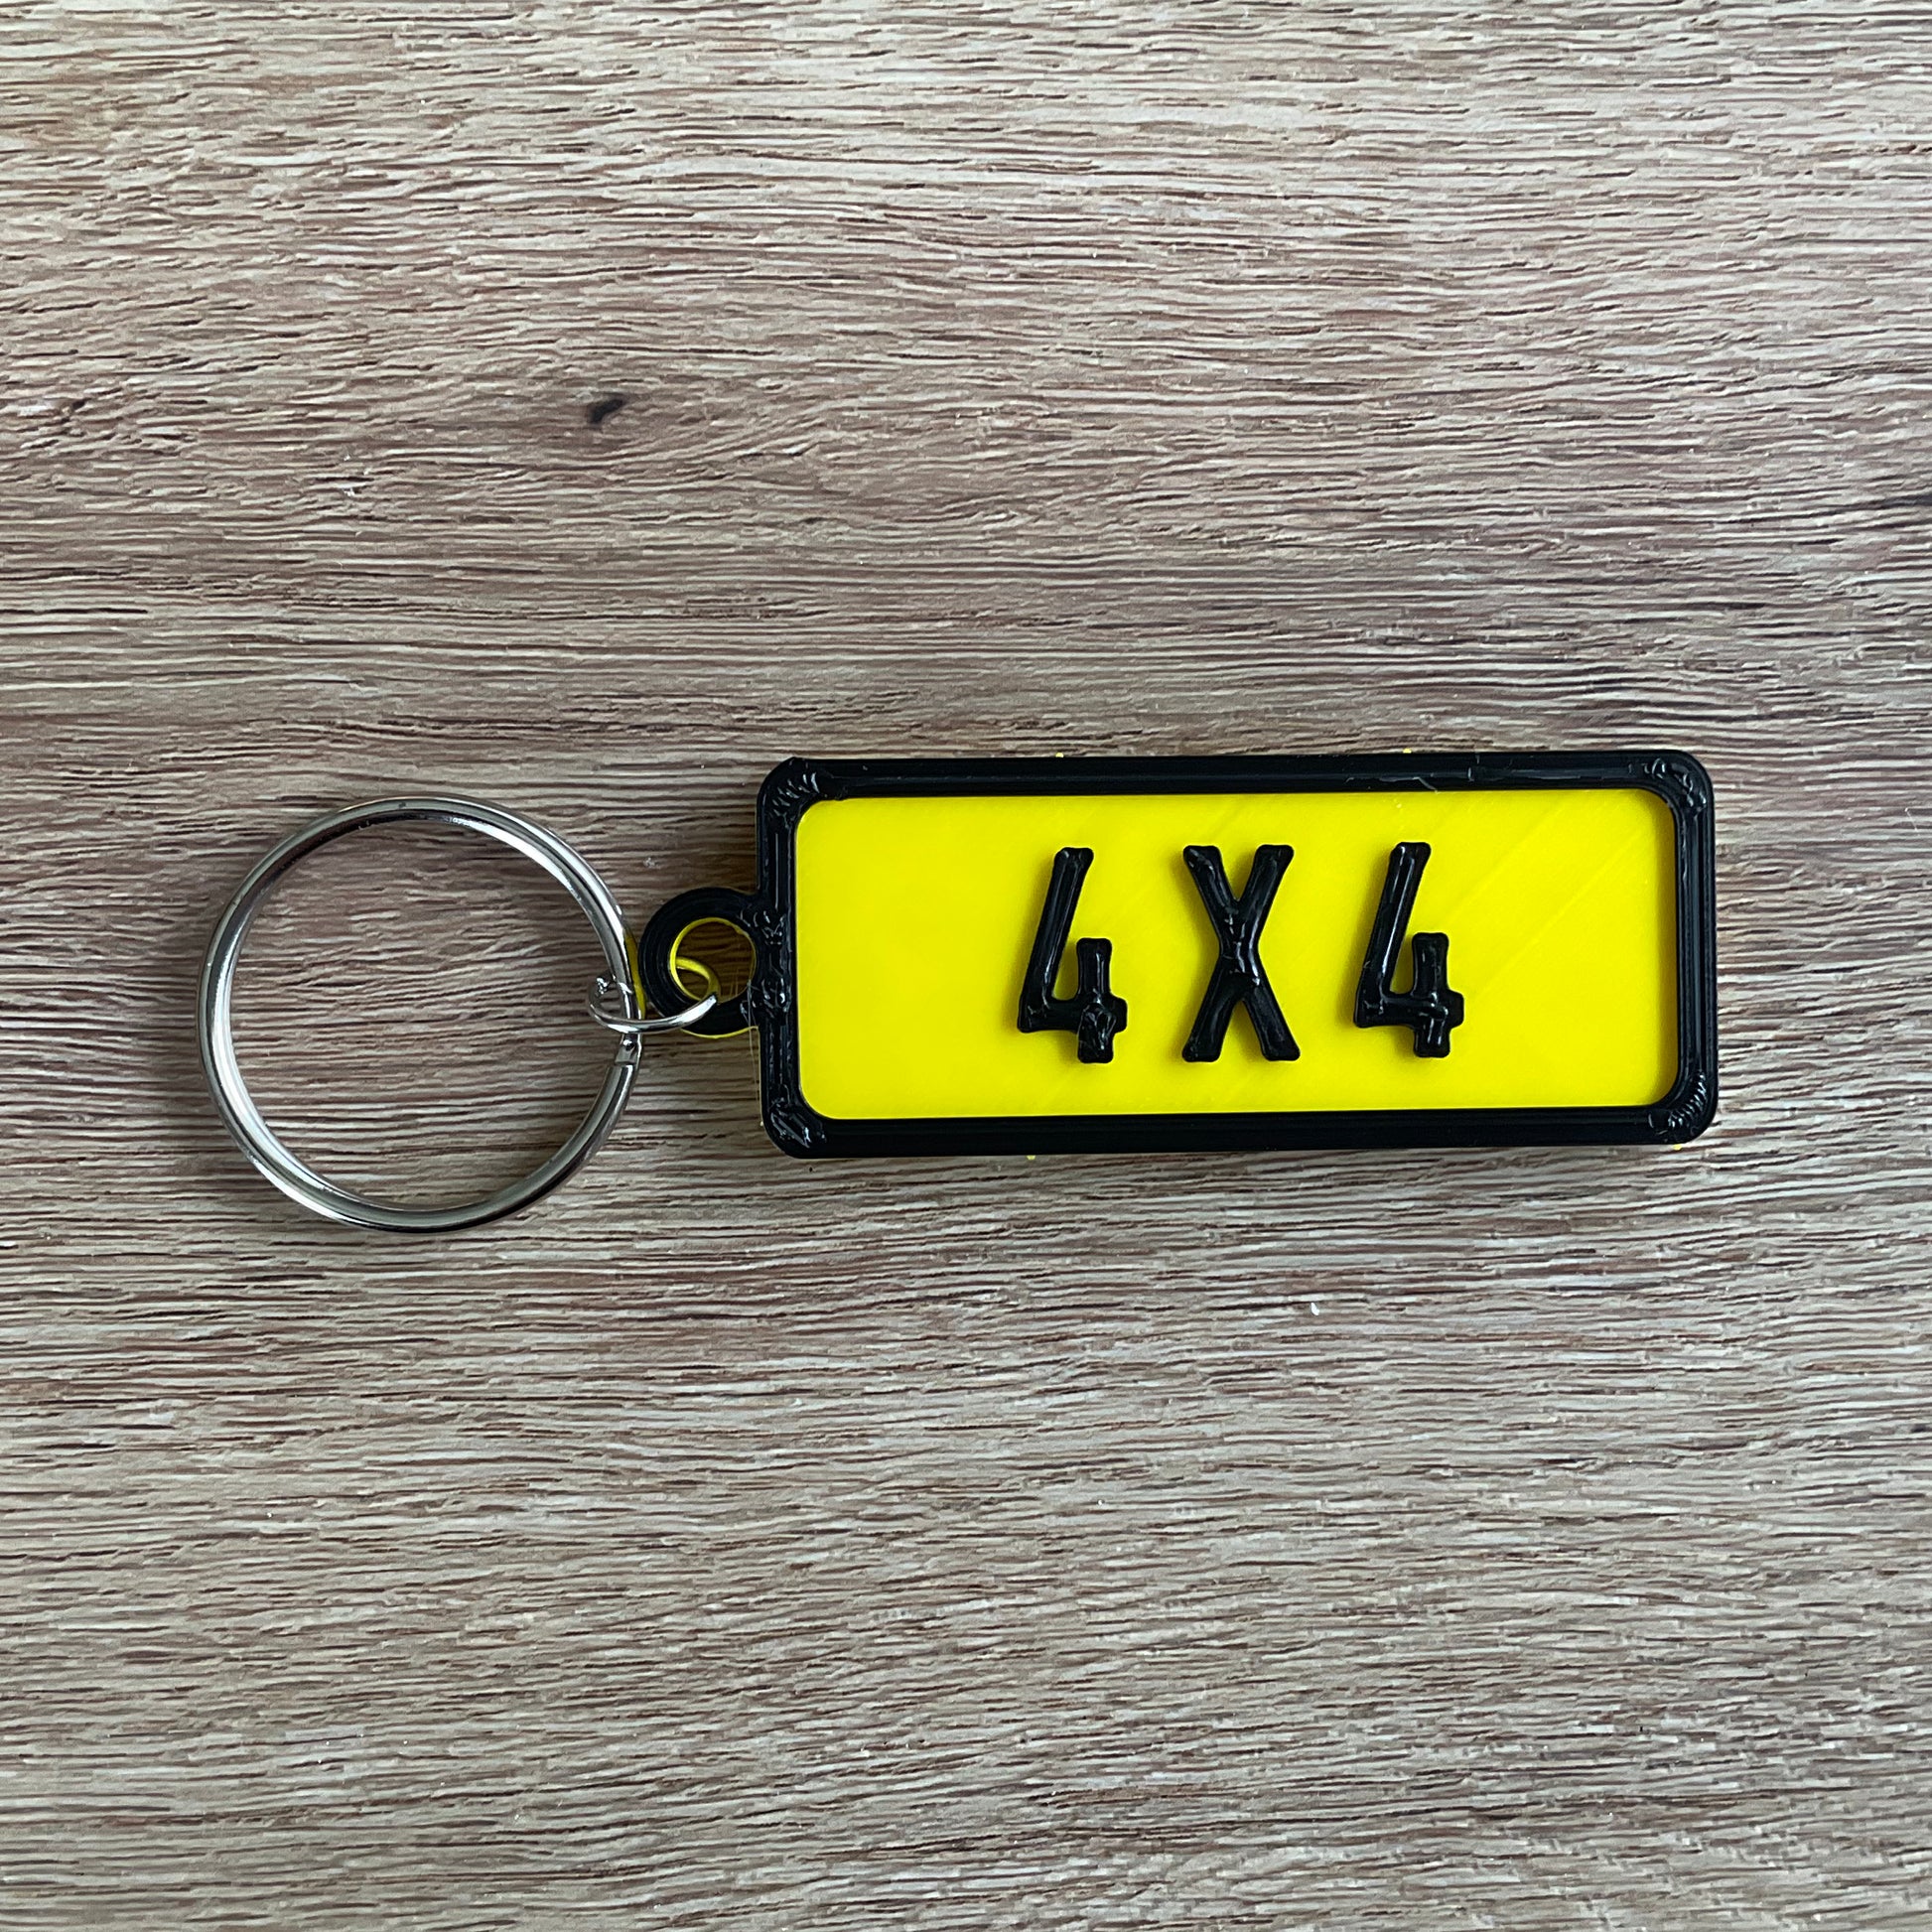 a picture of the black on yellow version of the four by four numberplate keychain.